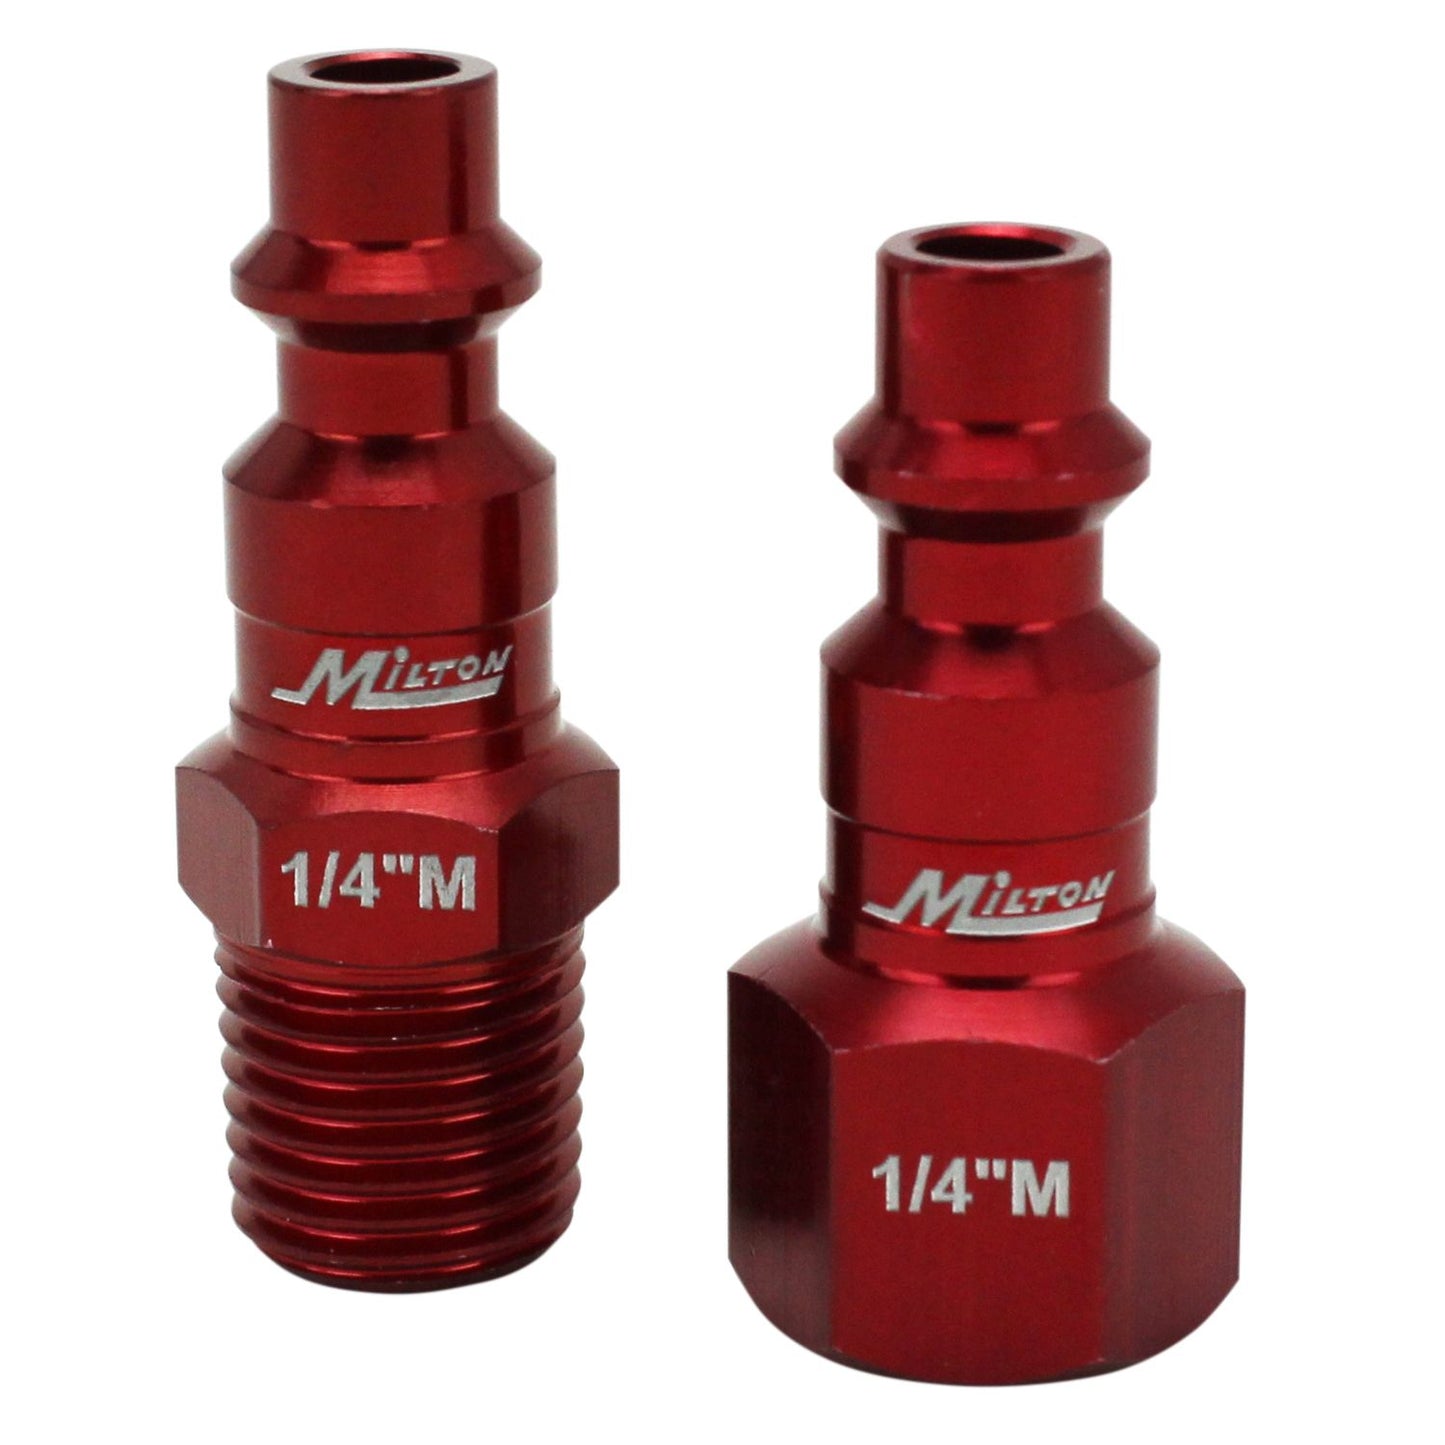 Milton ColorFit M Style coupler and Plug Kit 1/4" NPT 3 Pieces S-303MKIT Red